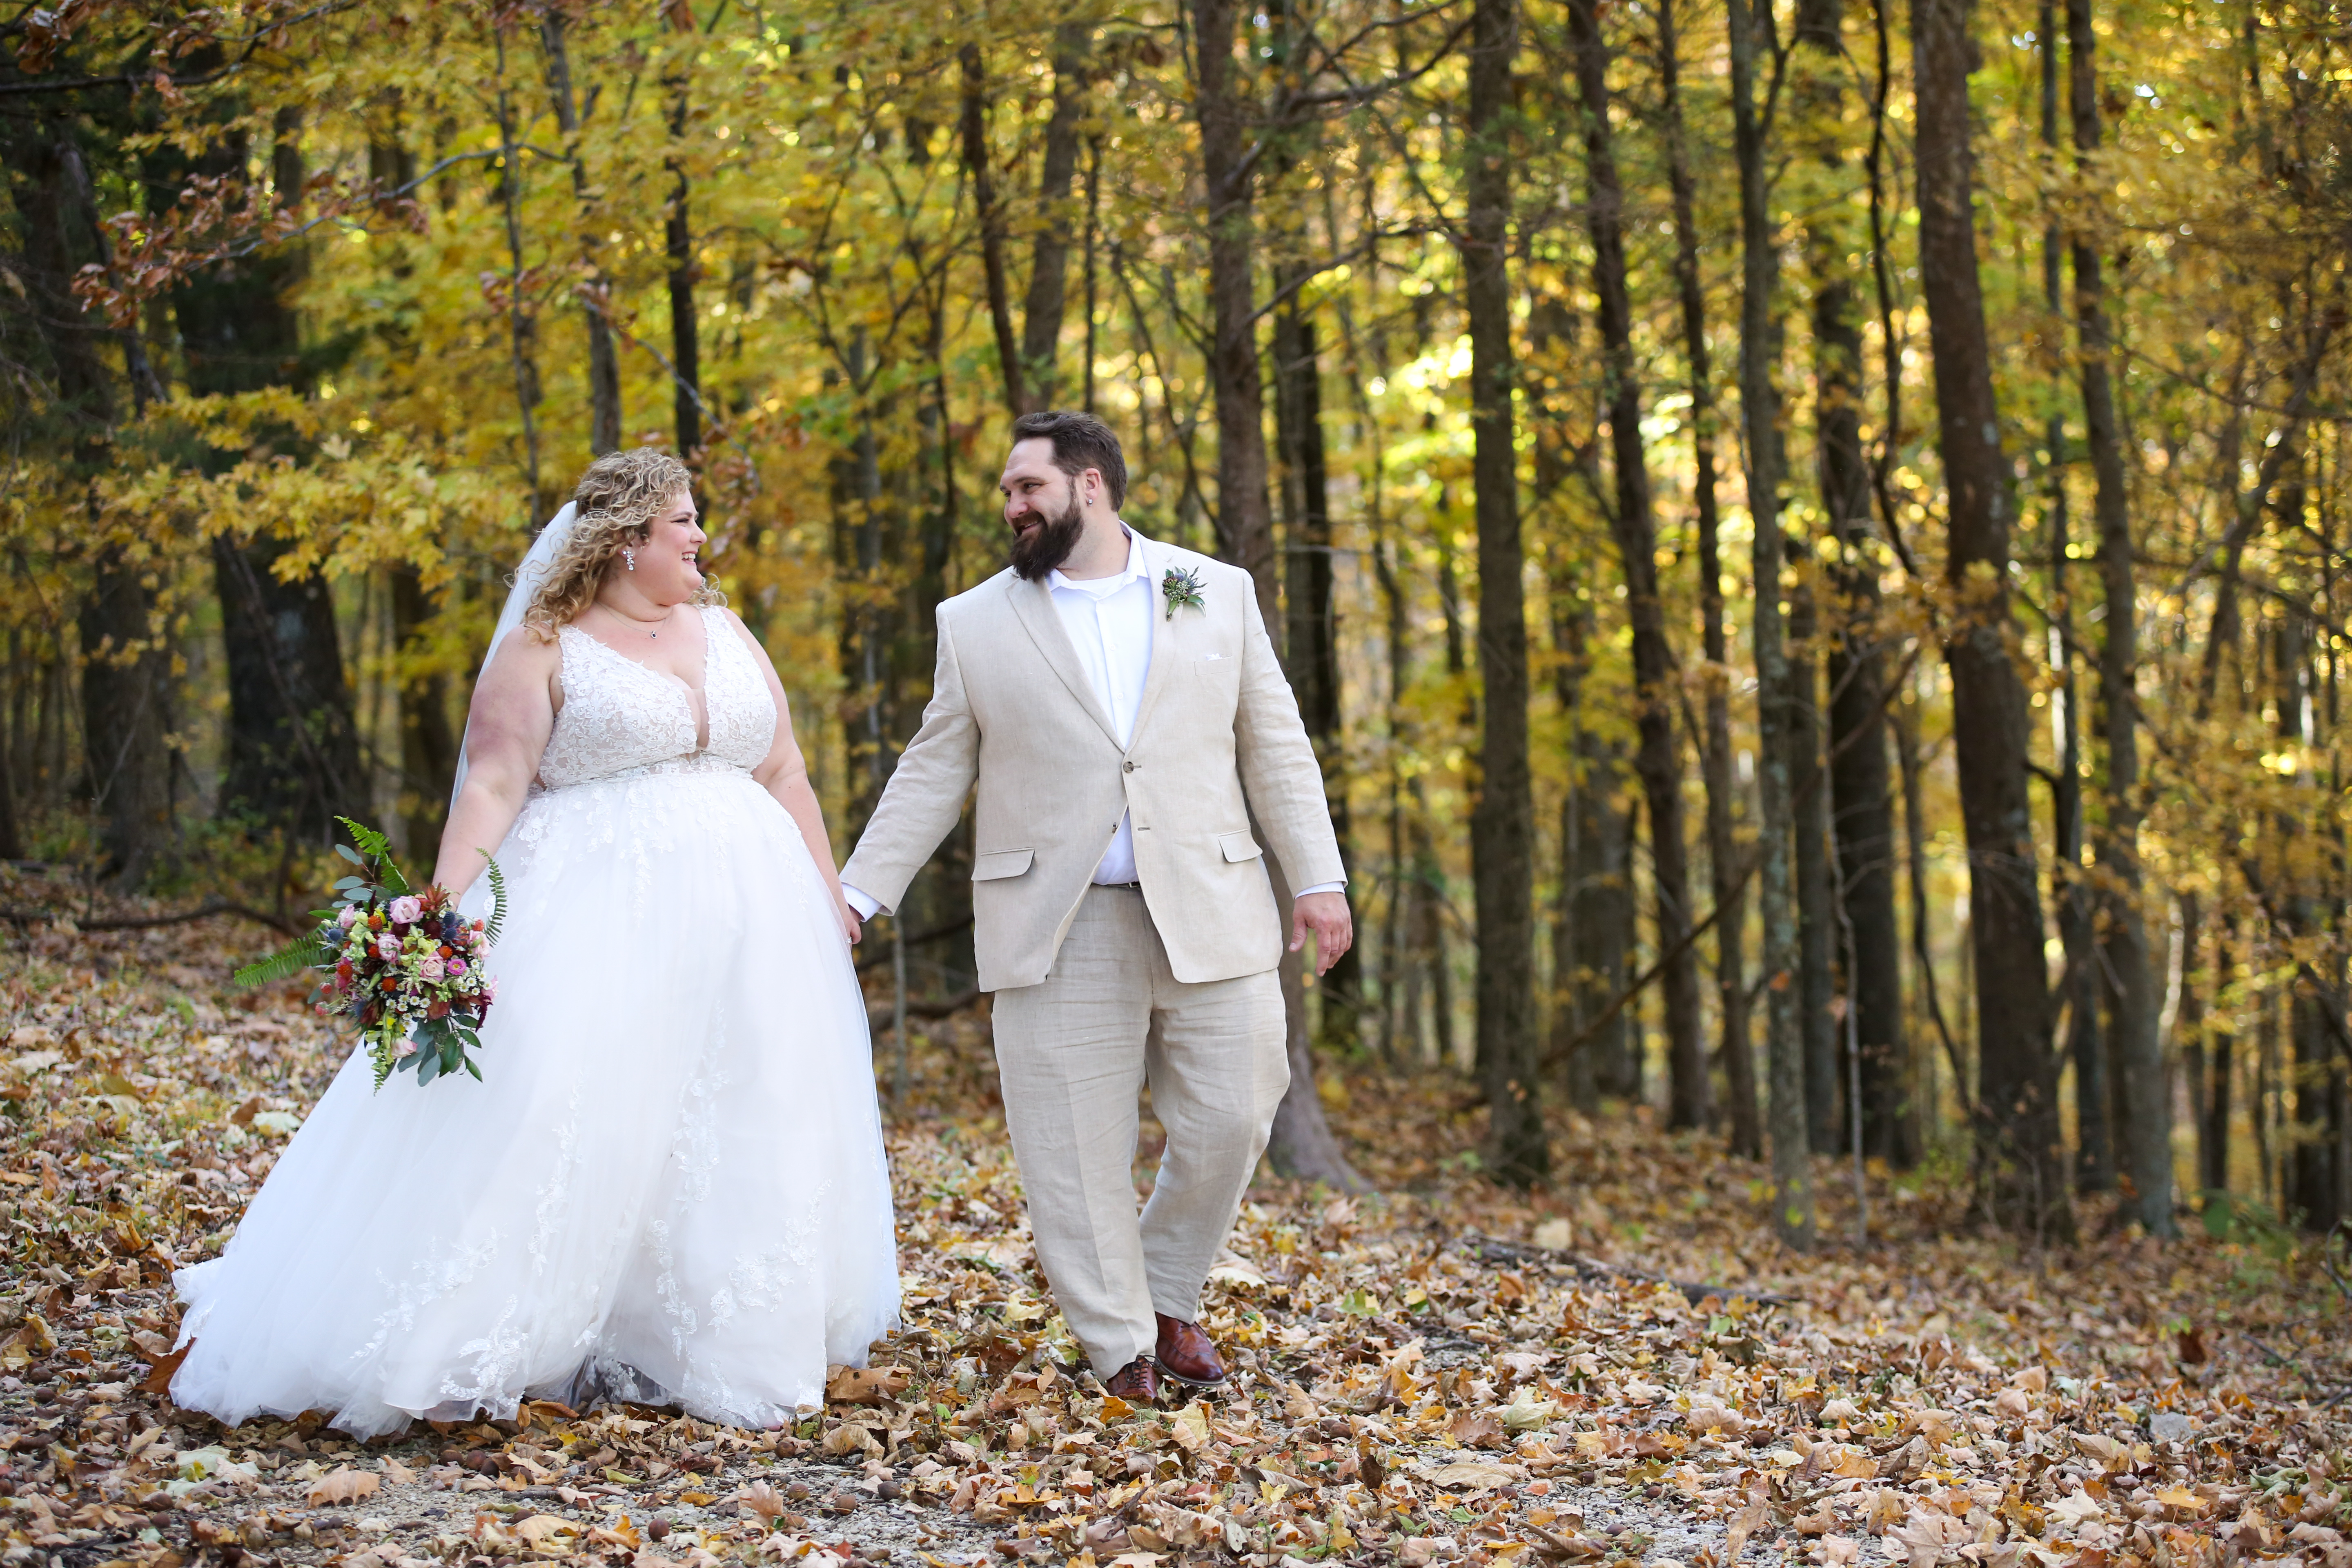 Jenna & Curtis’s Ste. Genevieve Fall Wedding at Chaumette Winery